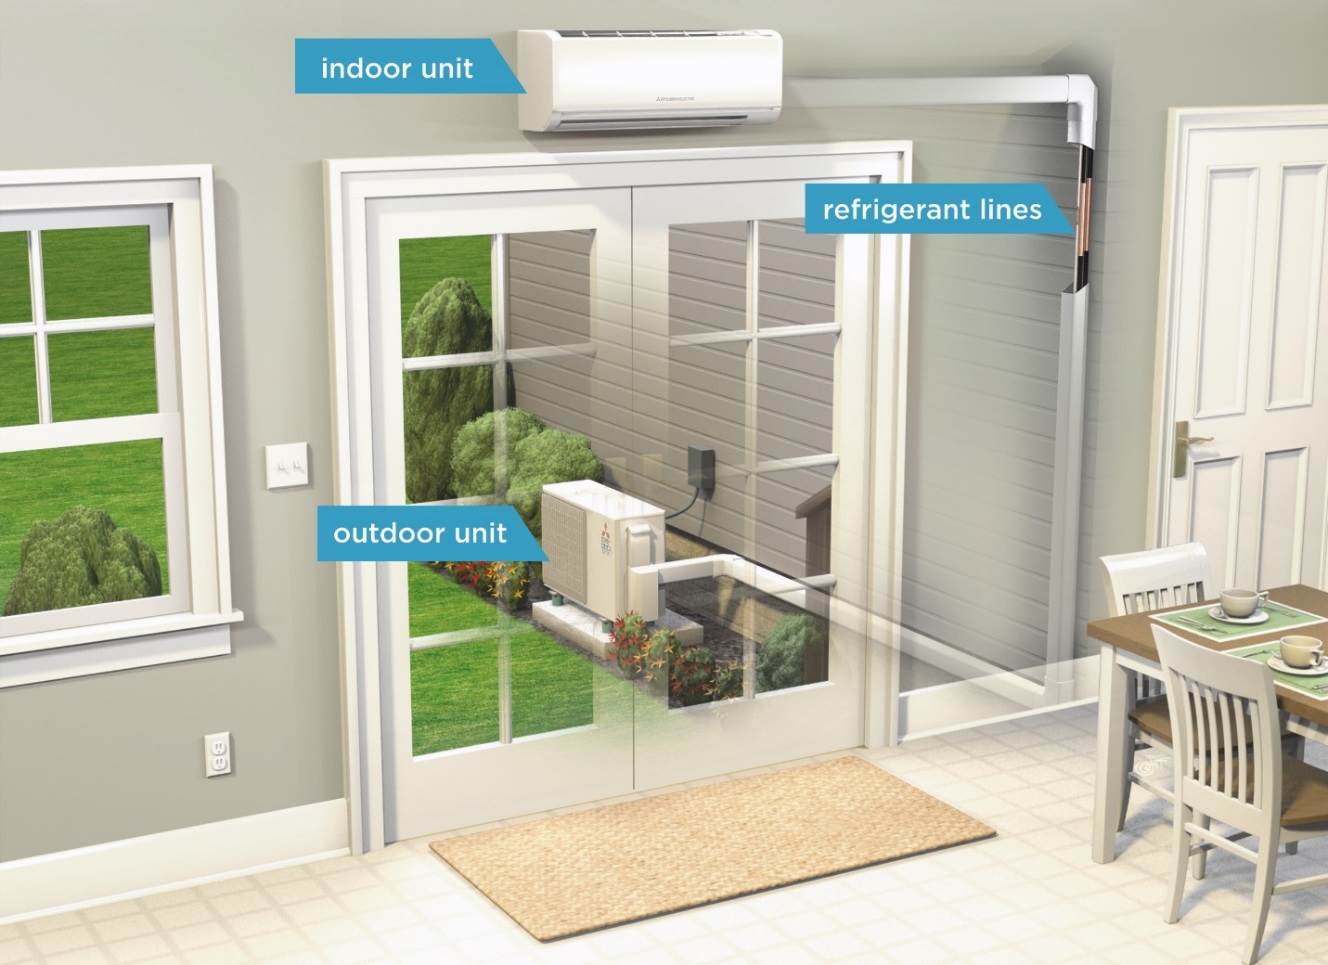 Ductless Mini Splits have an indoor unit that is connected to the outdoor unit using refrigerated lines.